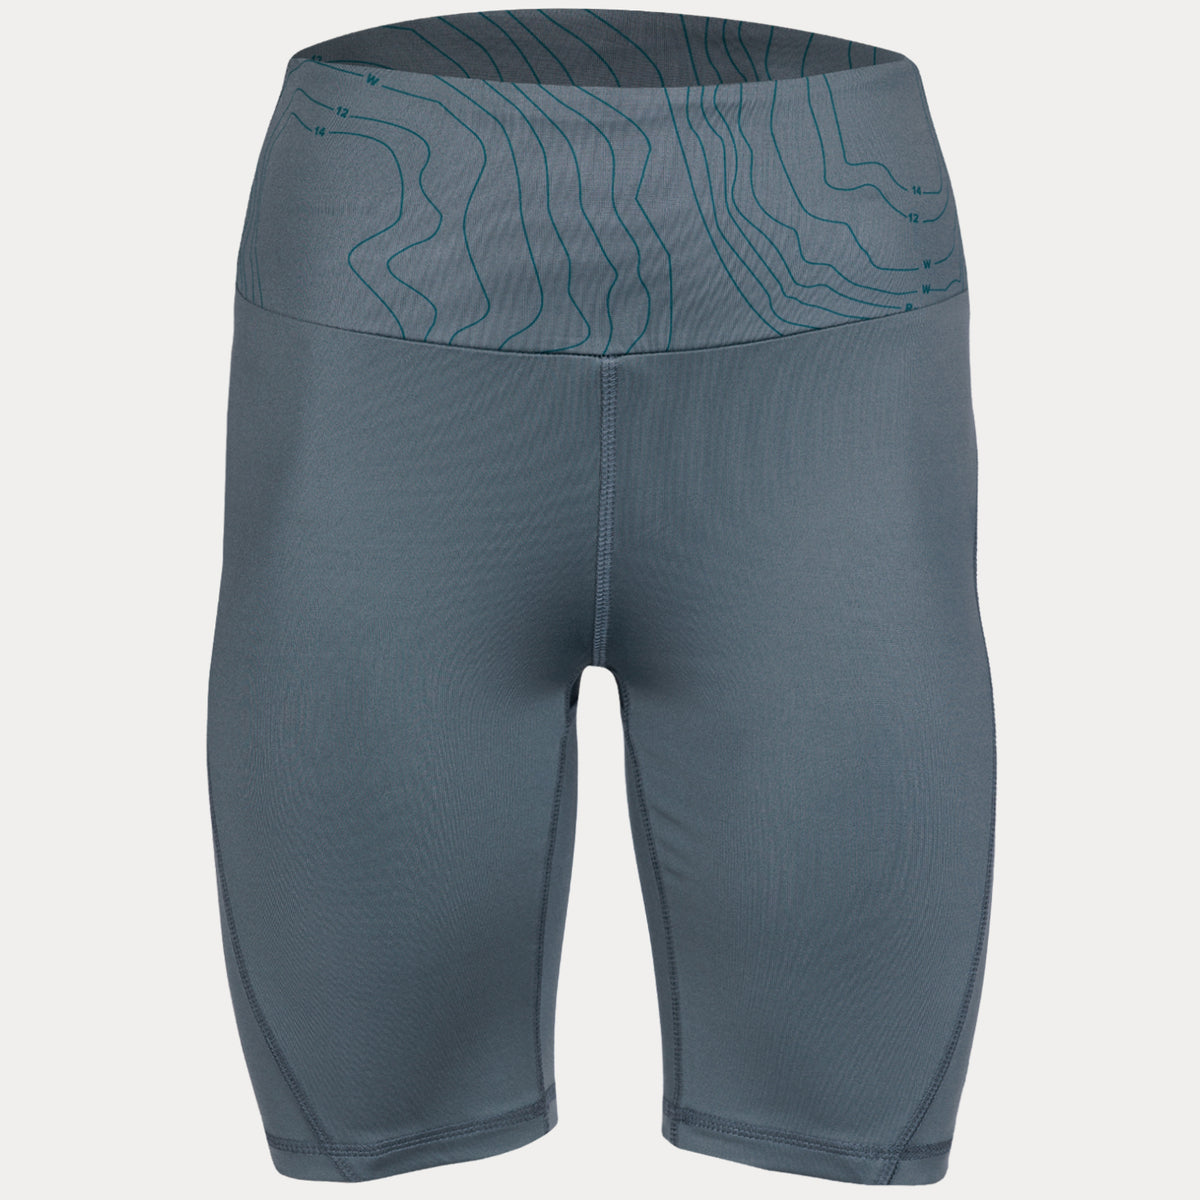 front view photo of compression shorts in dark blue